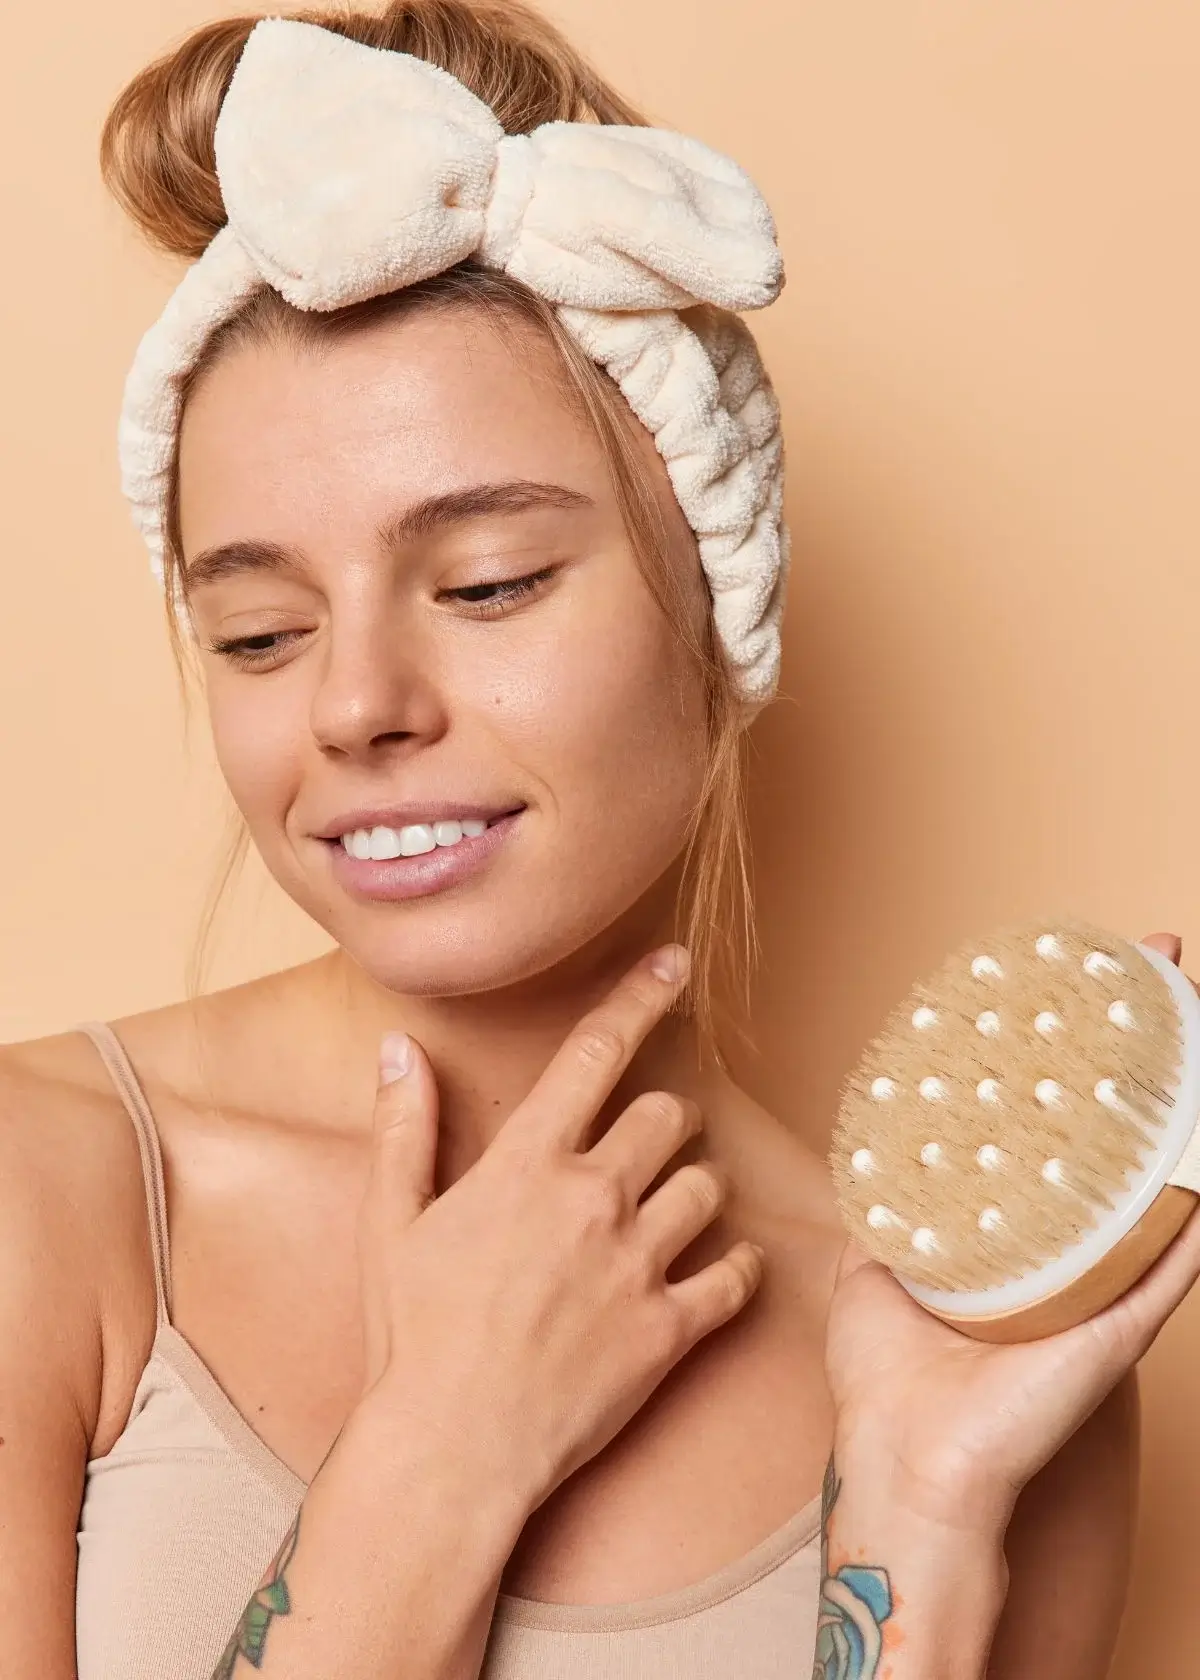 Is a silicone body scrubber suitable for dry skin?